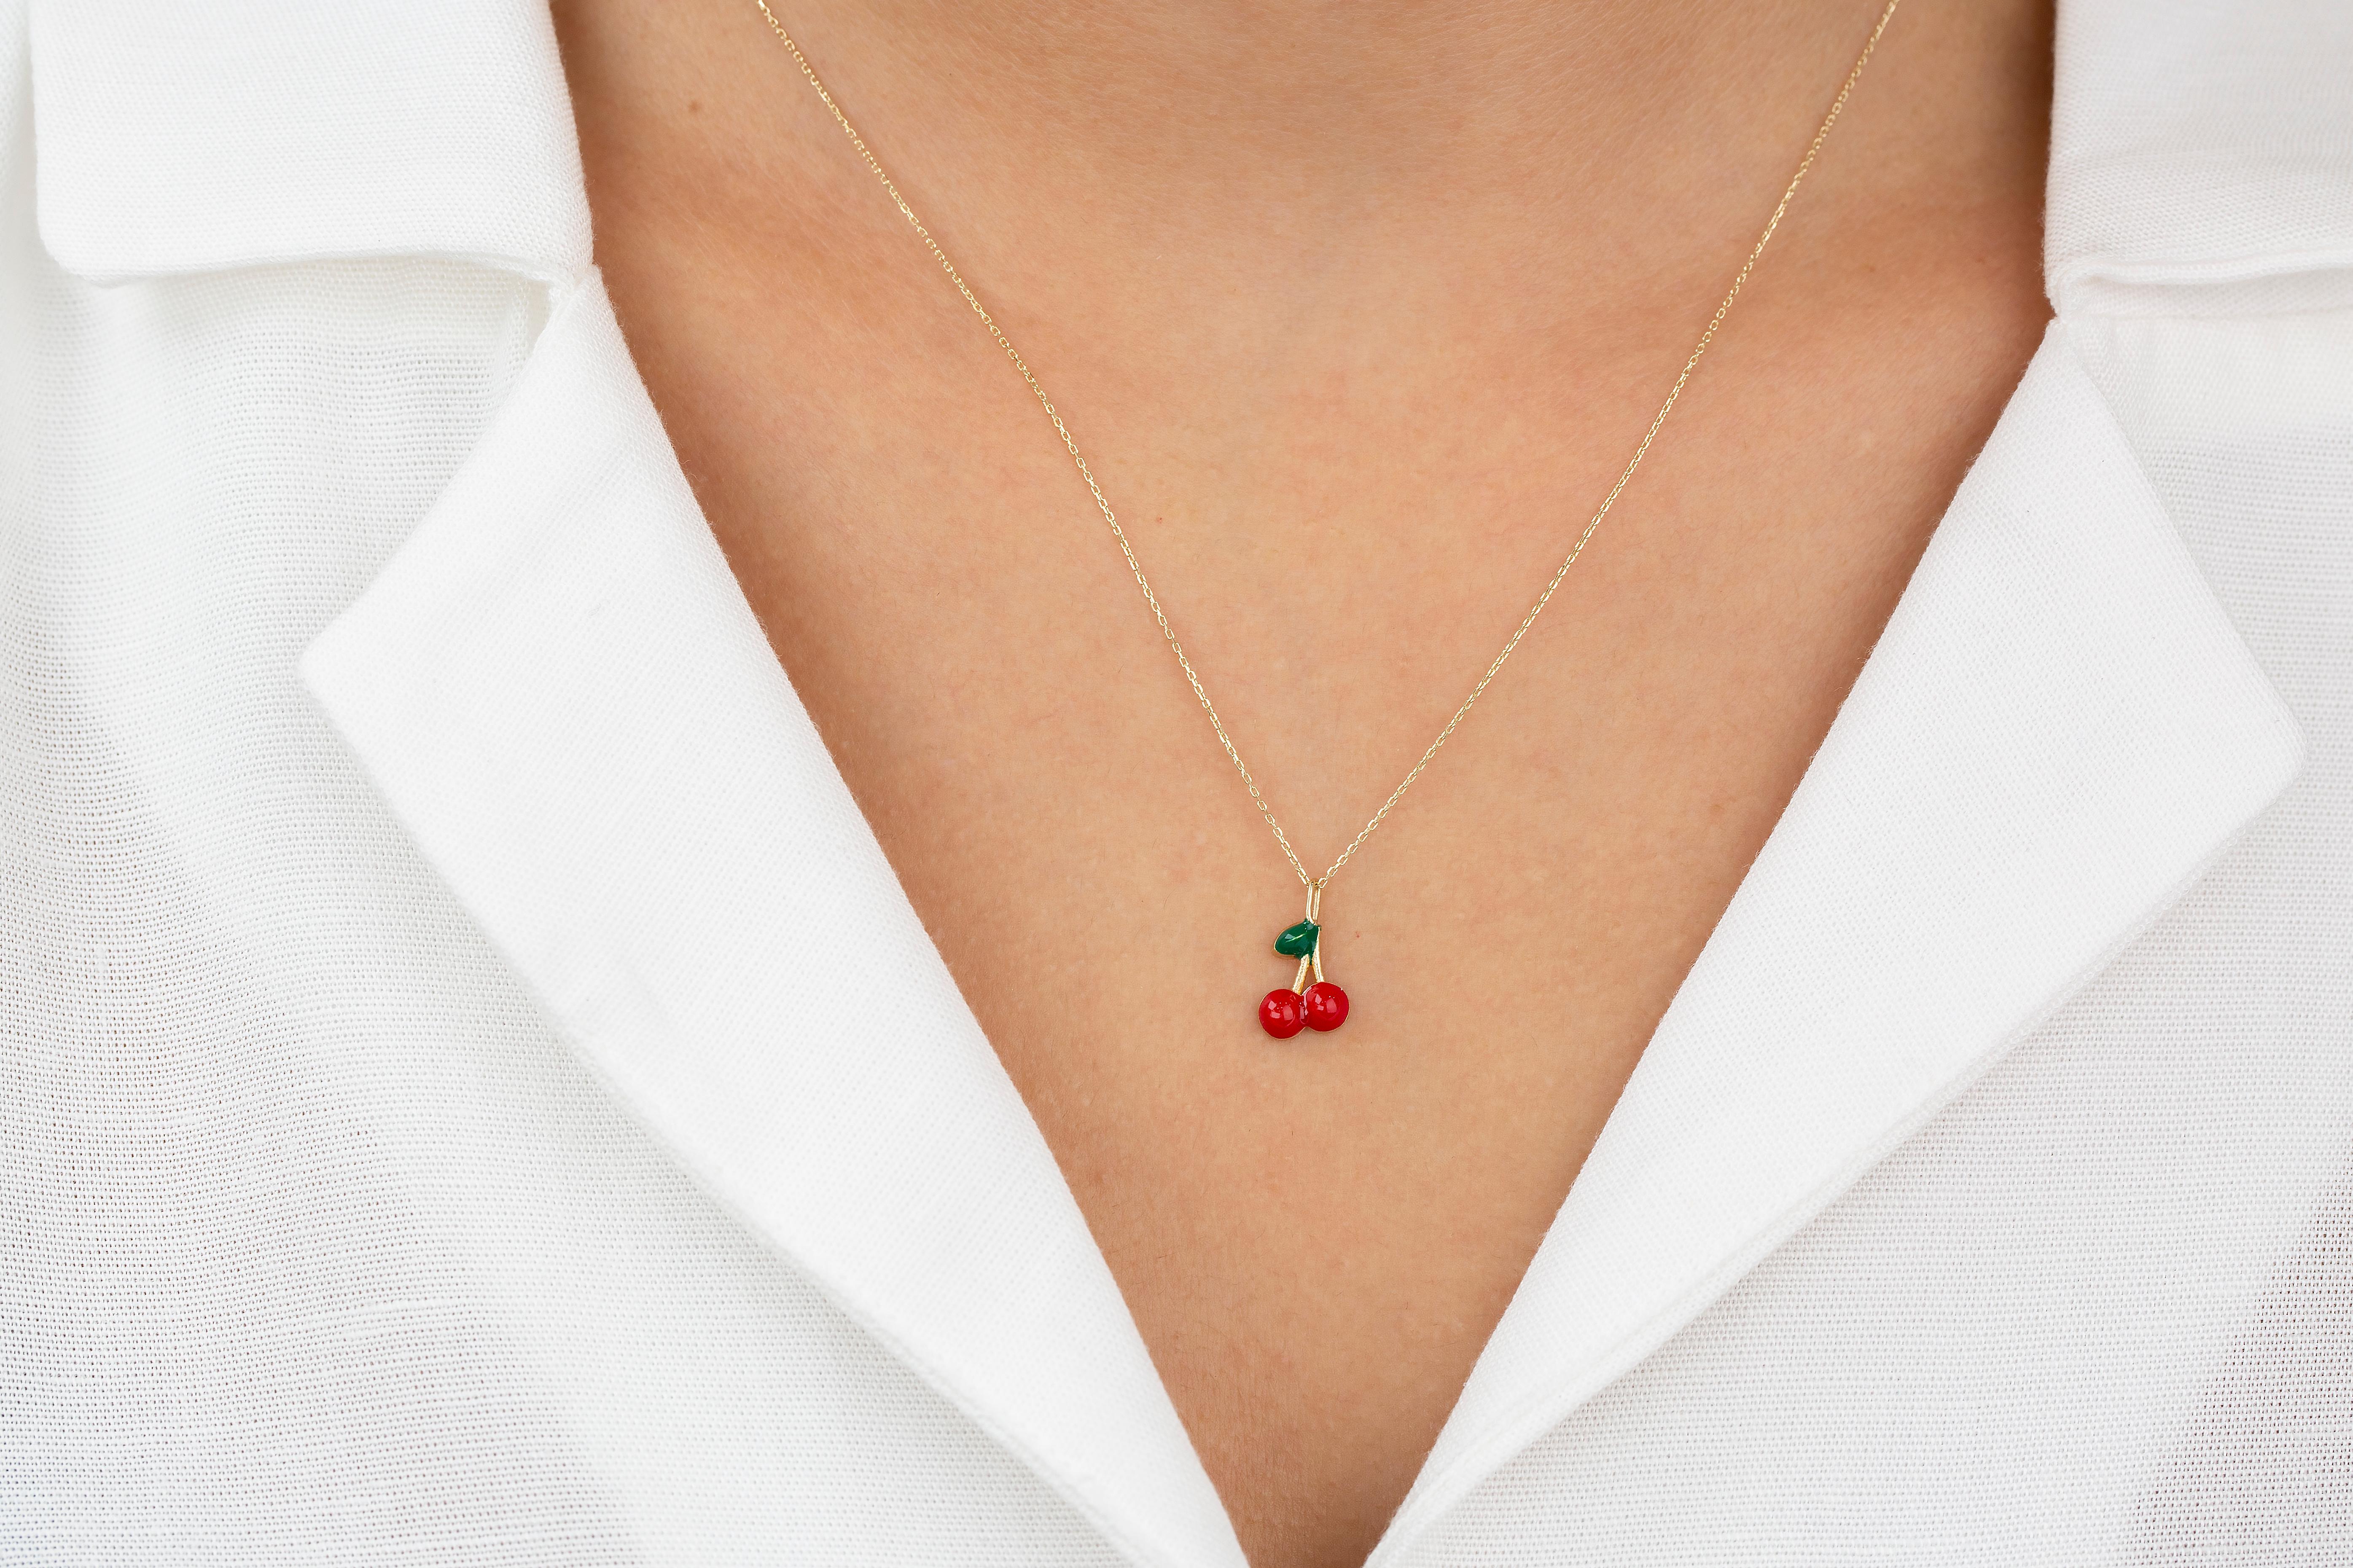 14K Gold Cherry Necklace - Enamel Fruit Necklace

Special desing necklace with enamel. It’s a manual labour product. ‘Handmade’. Fashionable product. 

This necklace was made with quality materials and excellent handwork. I guarantee  the quality